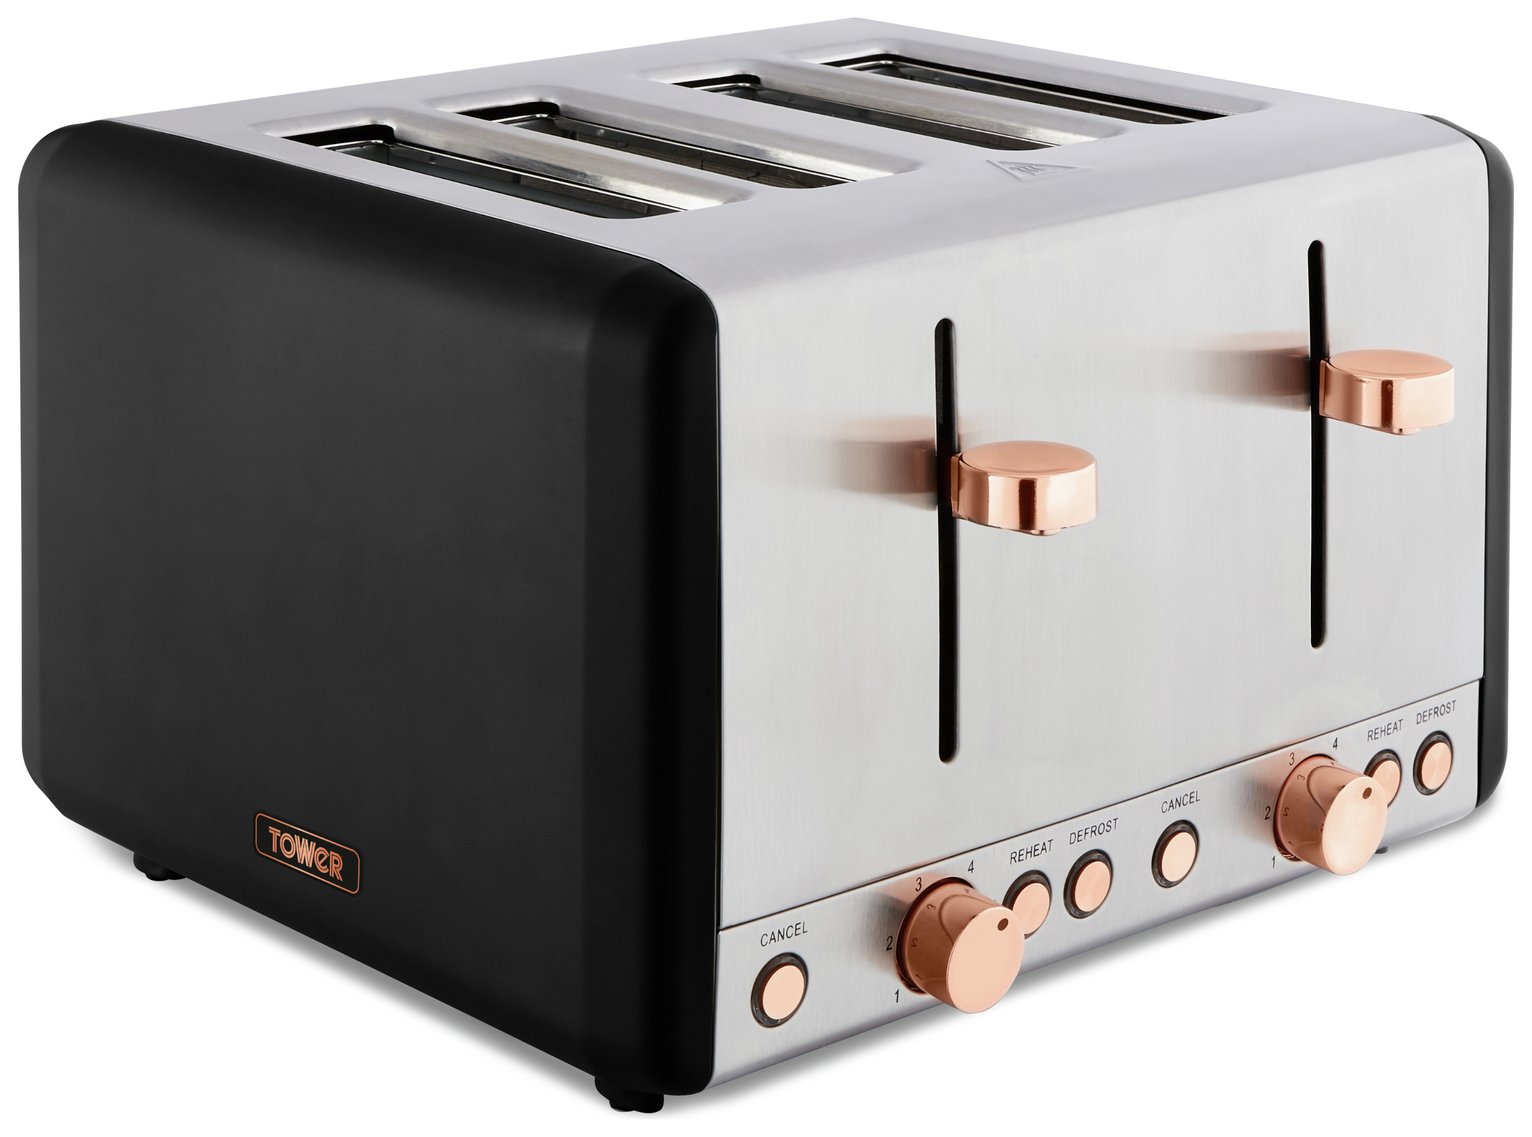 Tower T20051RG Cavaletto 4 Slice Toaster - Black & Rose Gold